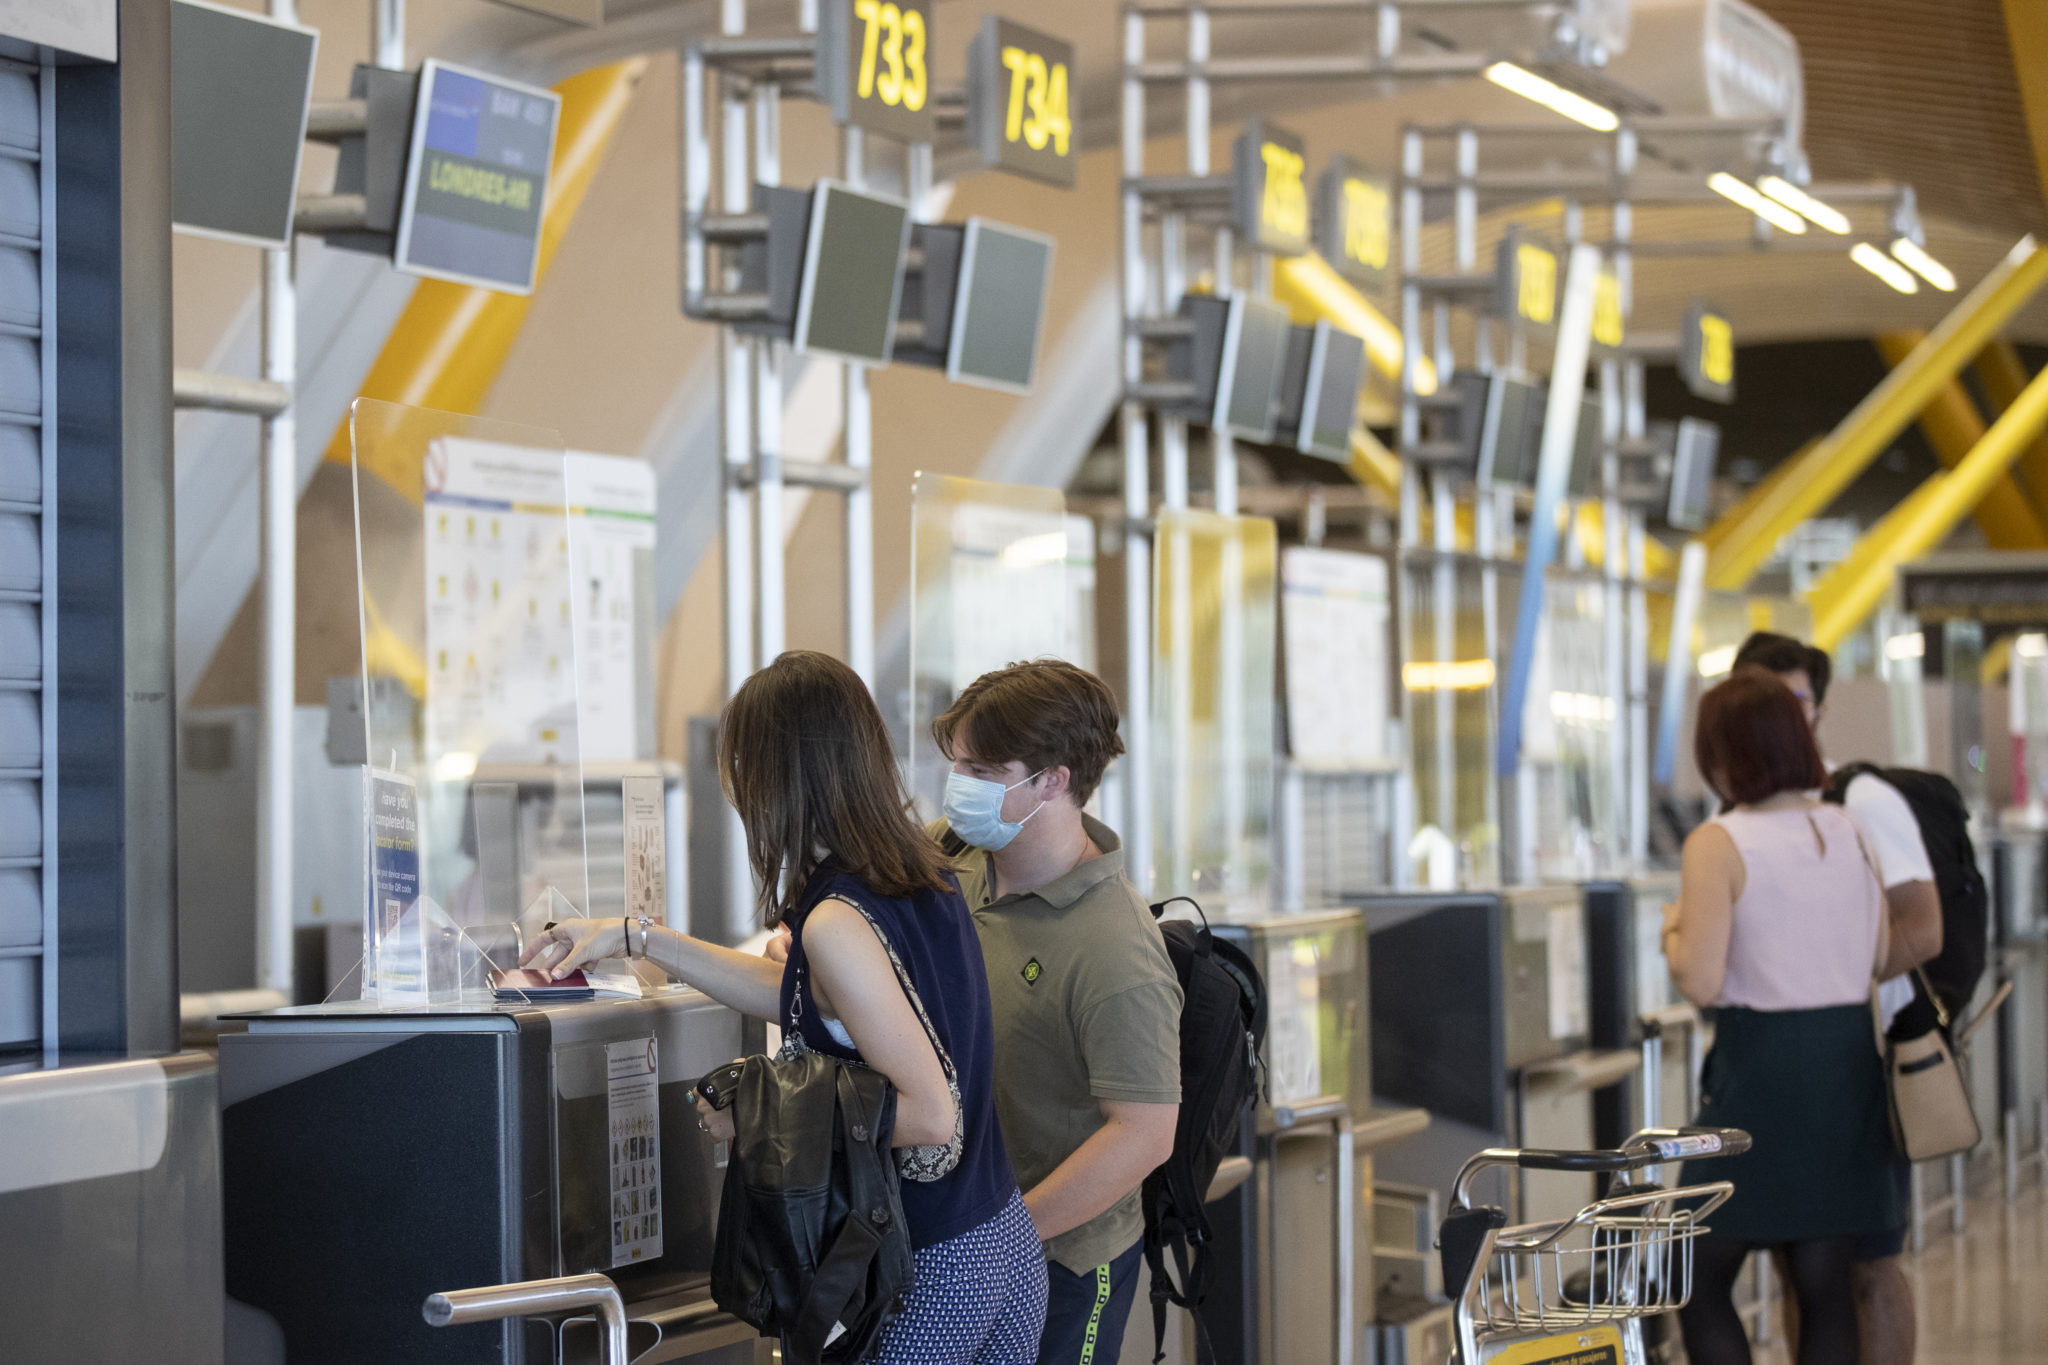 Passengers check in prior to departure for London at a British Airways check-in desk at Adolfo Suarez-Barajas international airport on the outskirts of Madrid, 26-07-2020. Image: Manu Fernandez/AP/Press Association Images